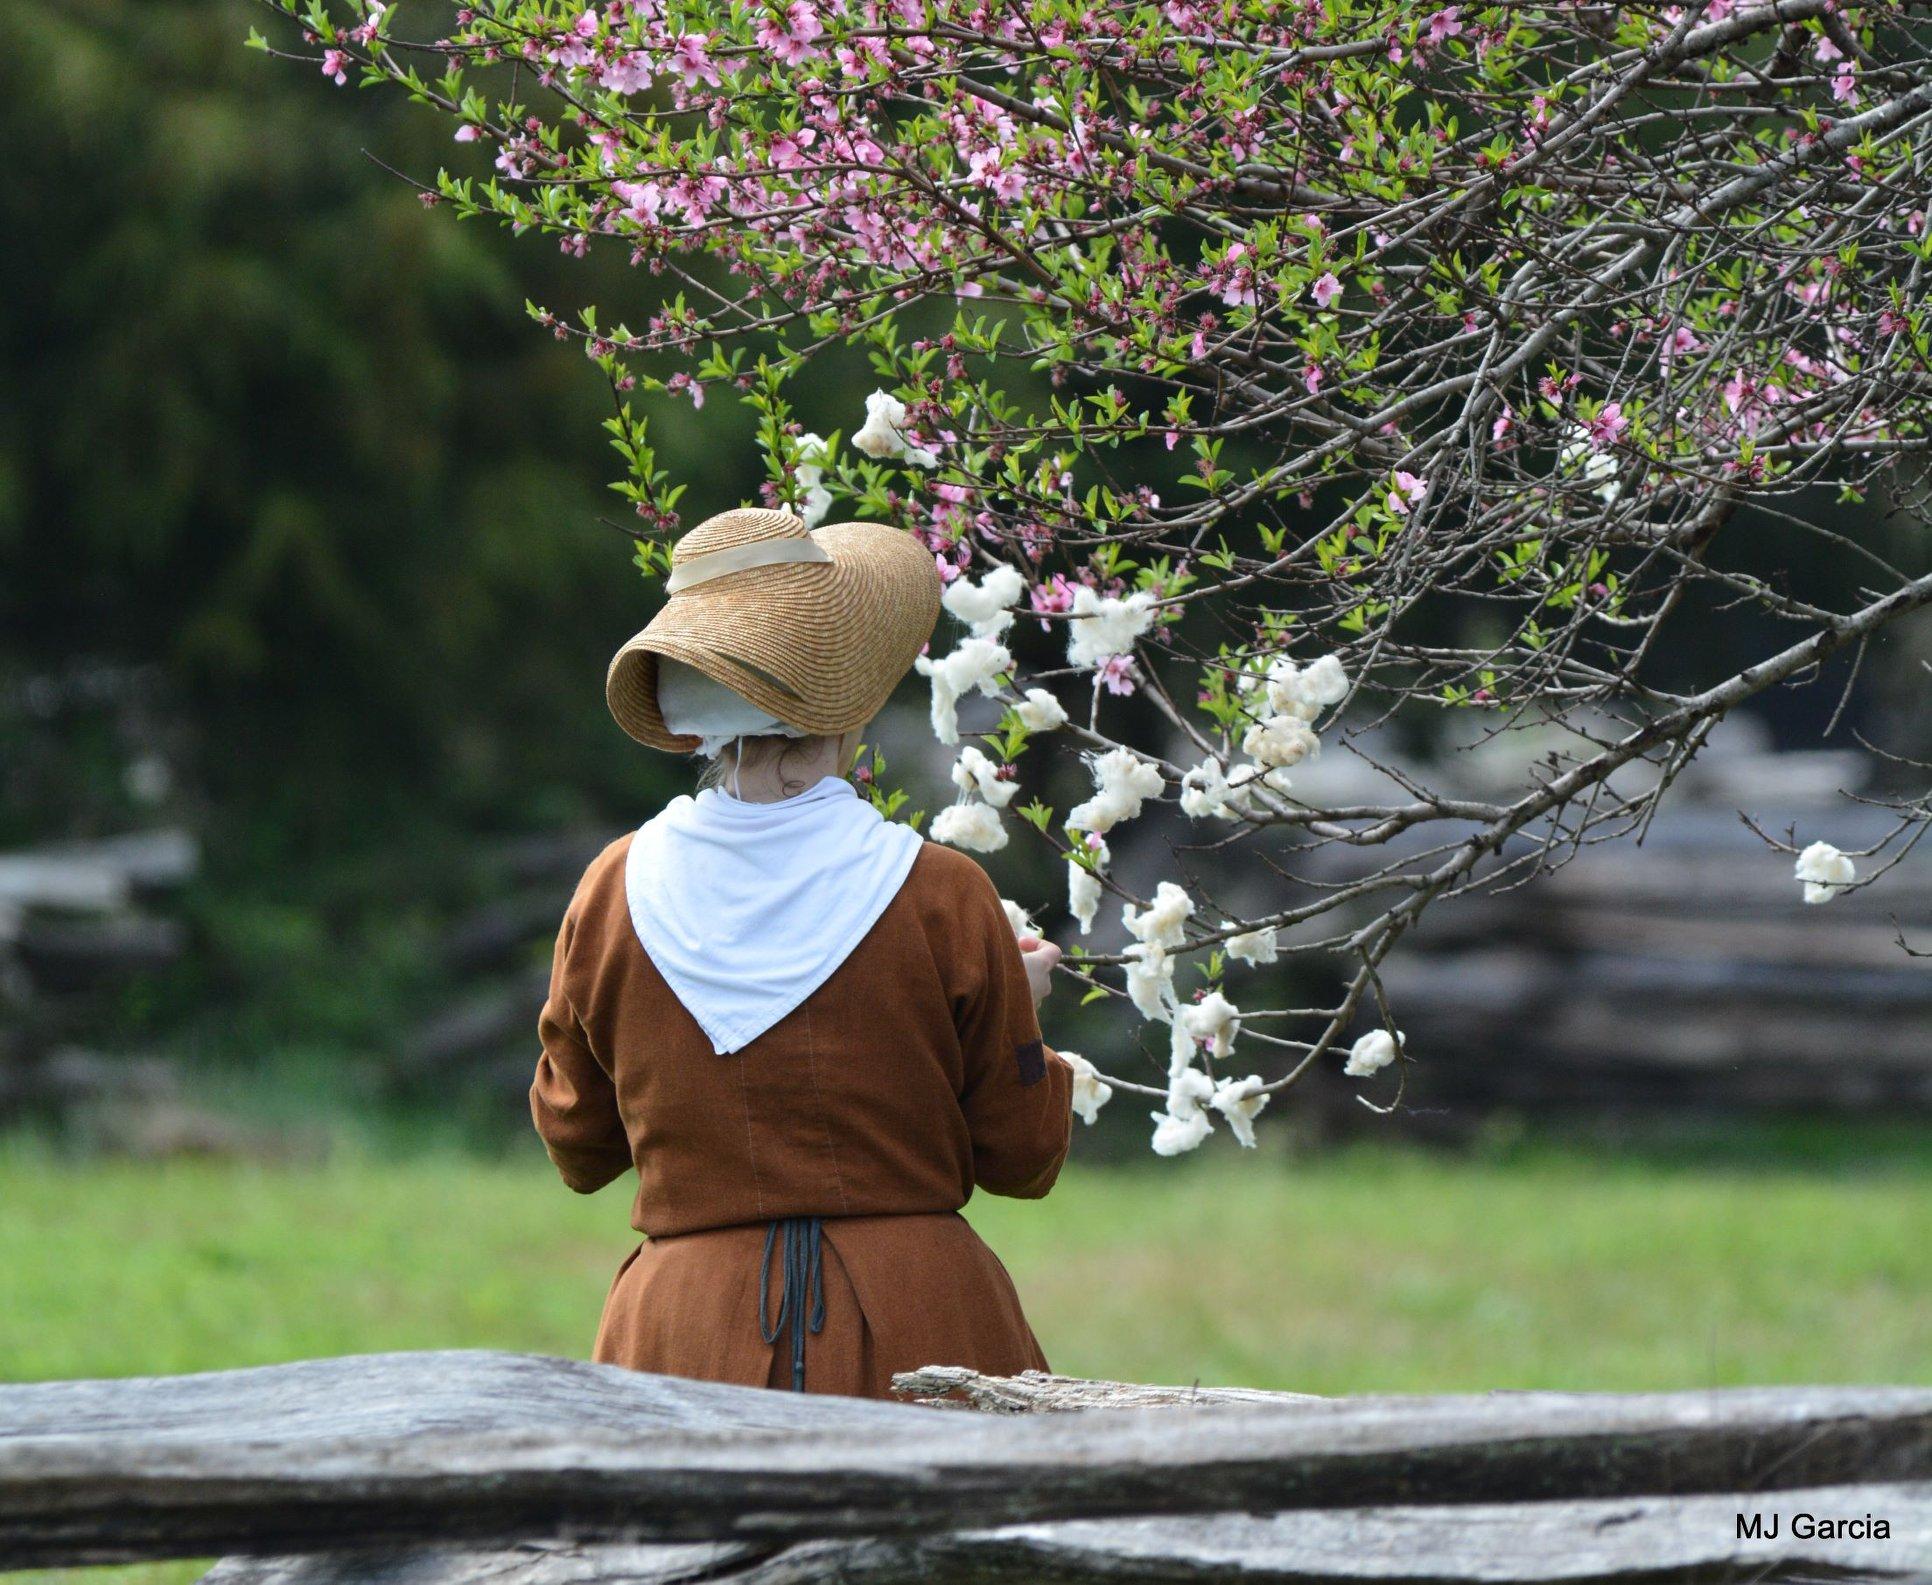 A woman wearing 18th century dress stands next to a blooming tree